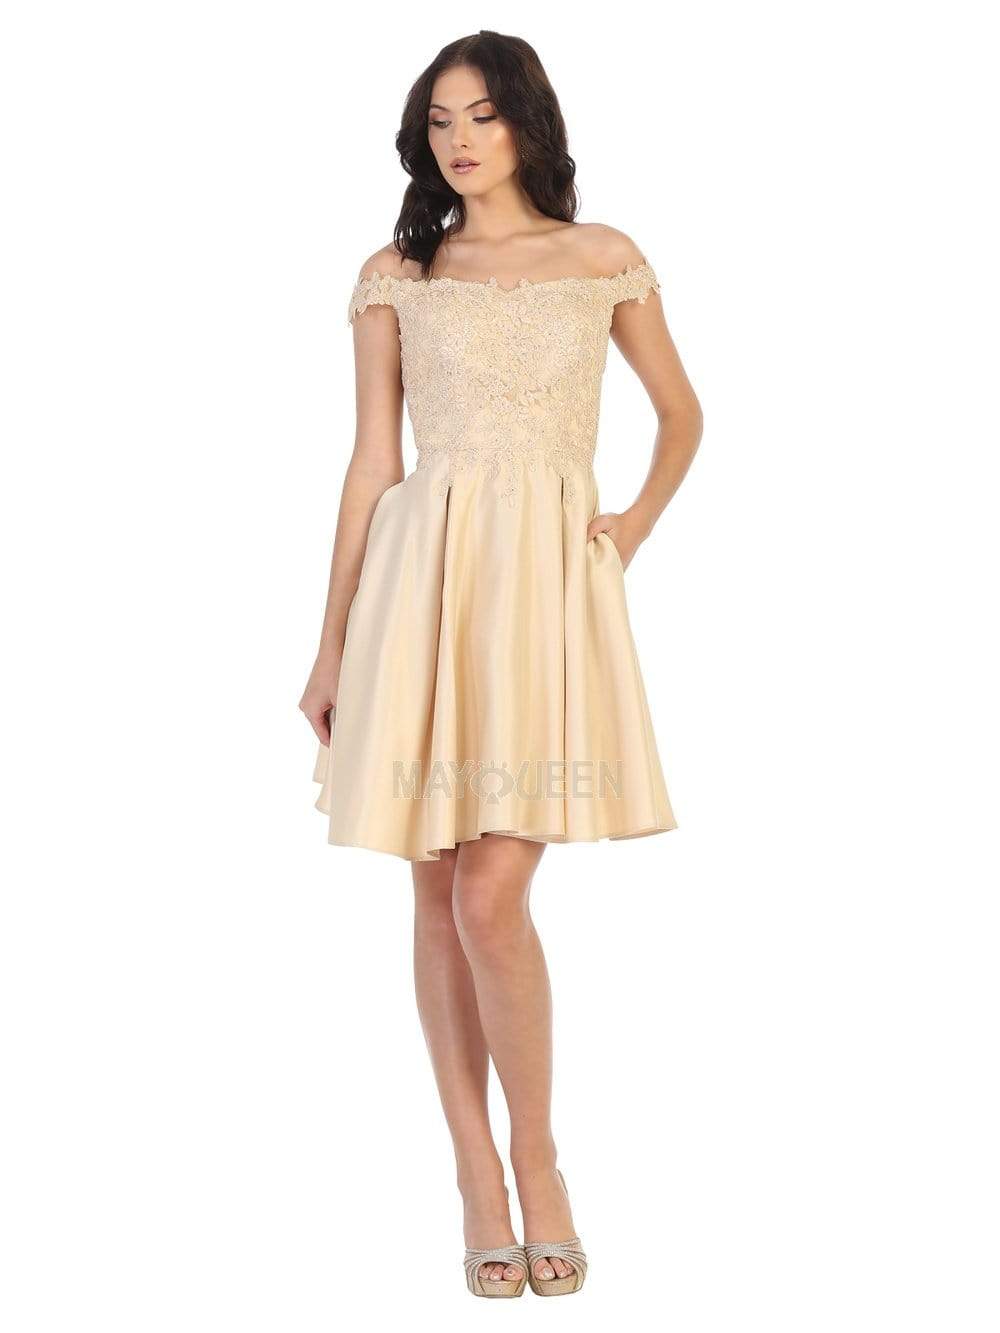 May Queen - MQ1766 Off Shoulder Beaded Lace Satin Cocktail Dress Homecoming Dresses 2 / Champagne